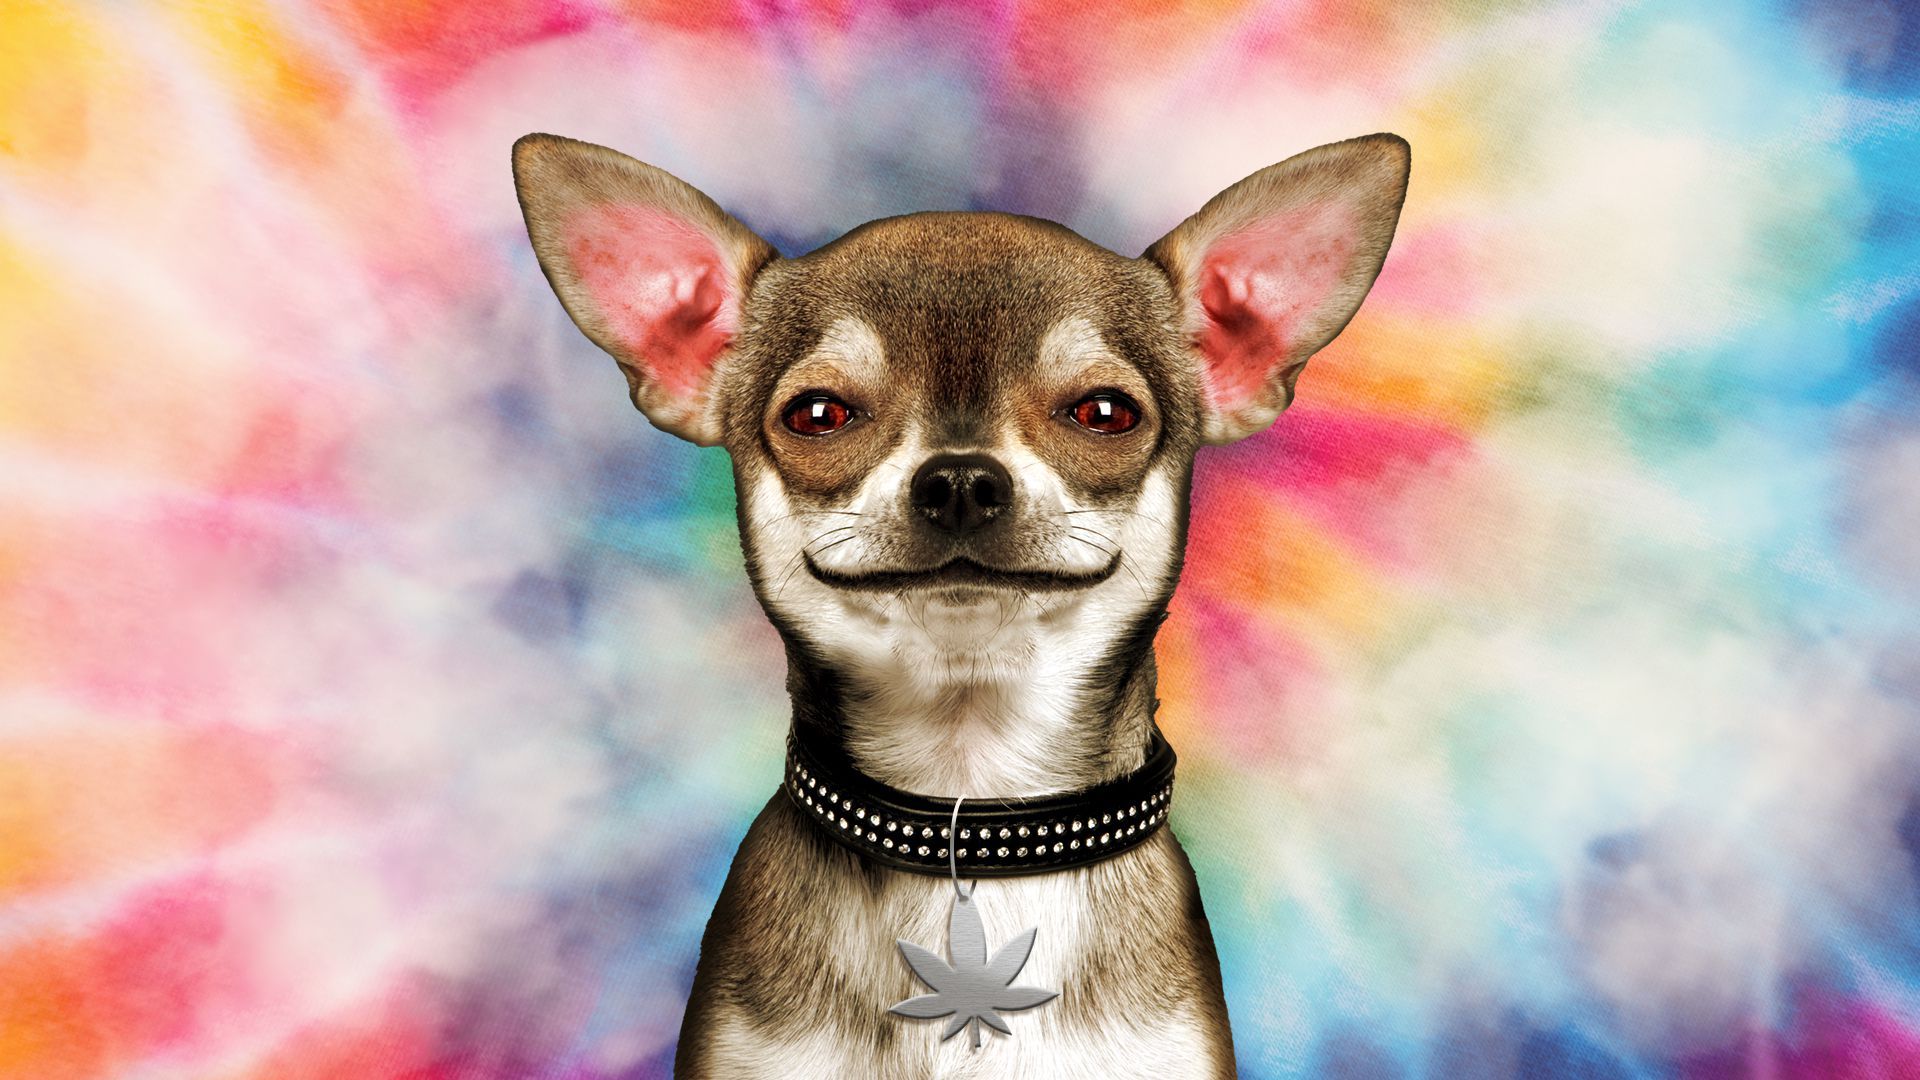 Illustration of a chihuahua in front of a smokey, tie-die background, wearing a cannabis leaf shaped dog tag